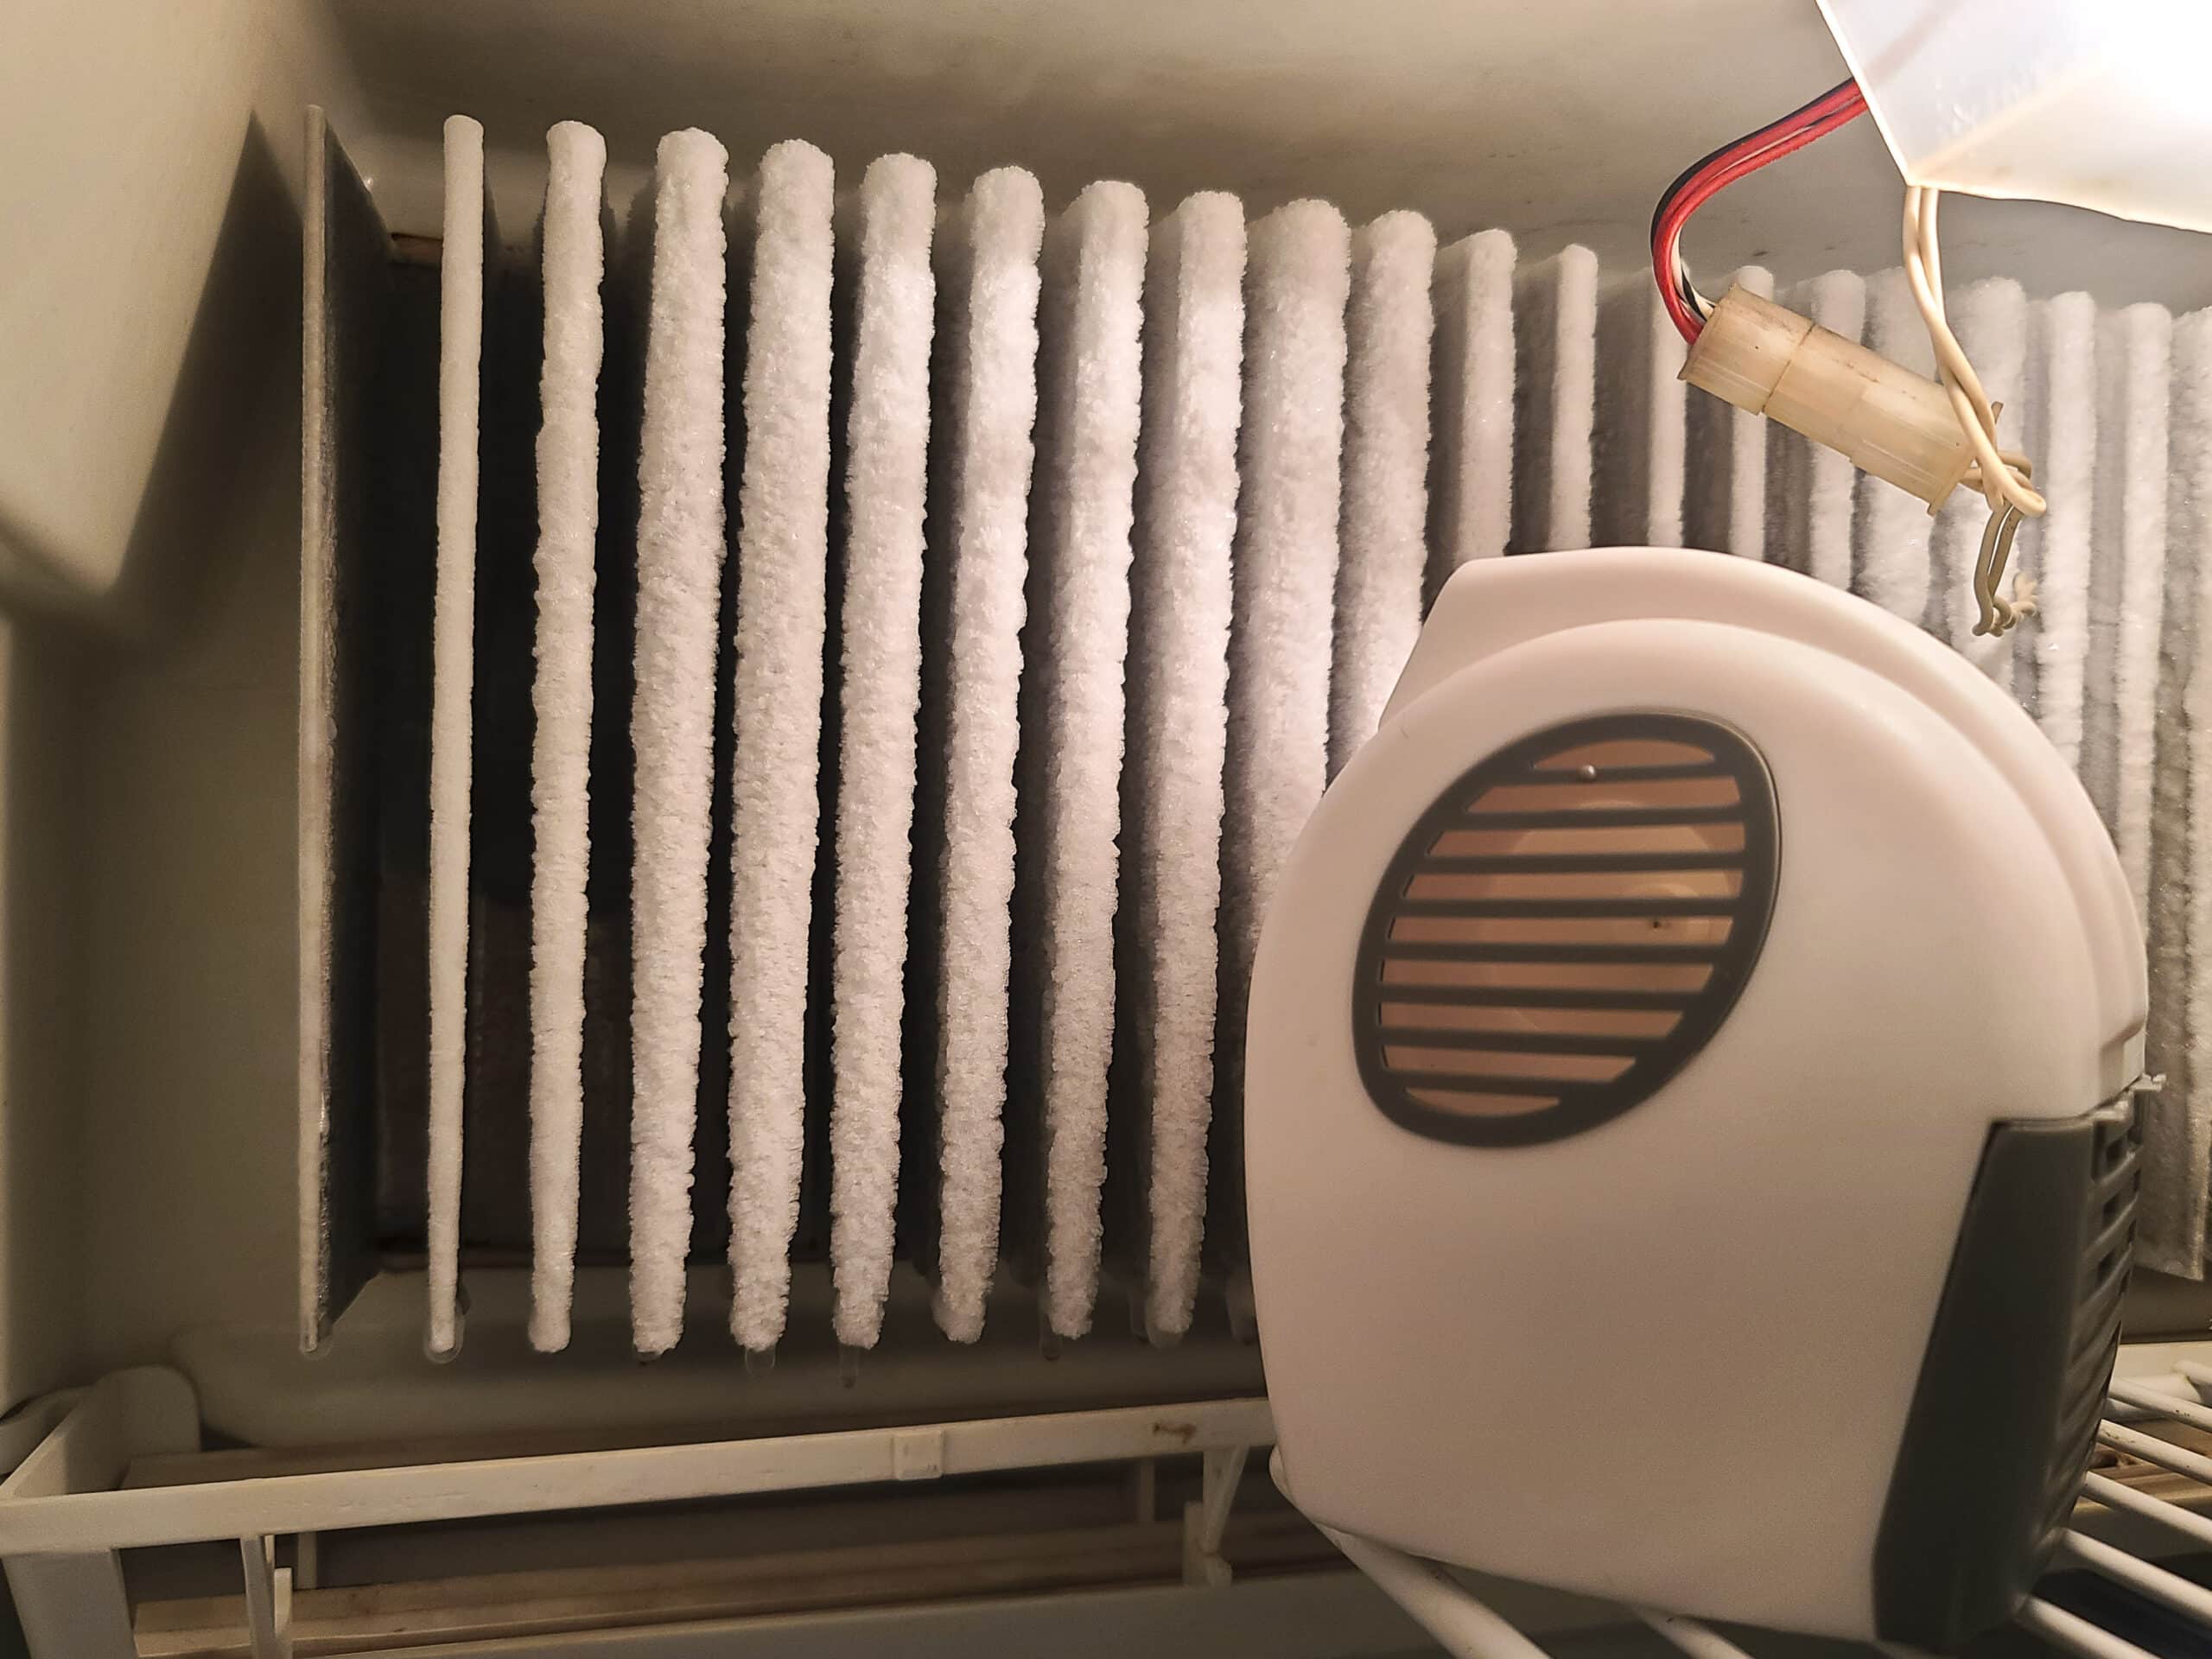 The inside of an RV fridge with a small fan aimed at the fins.  There is ice buildup on the fins.